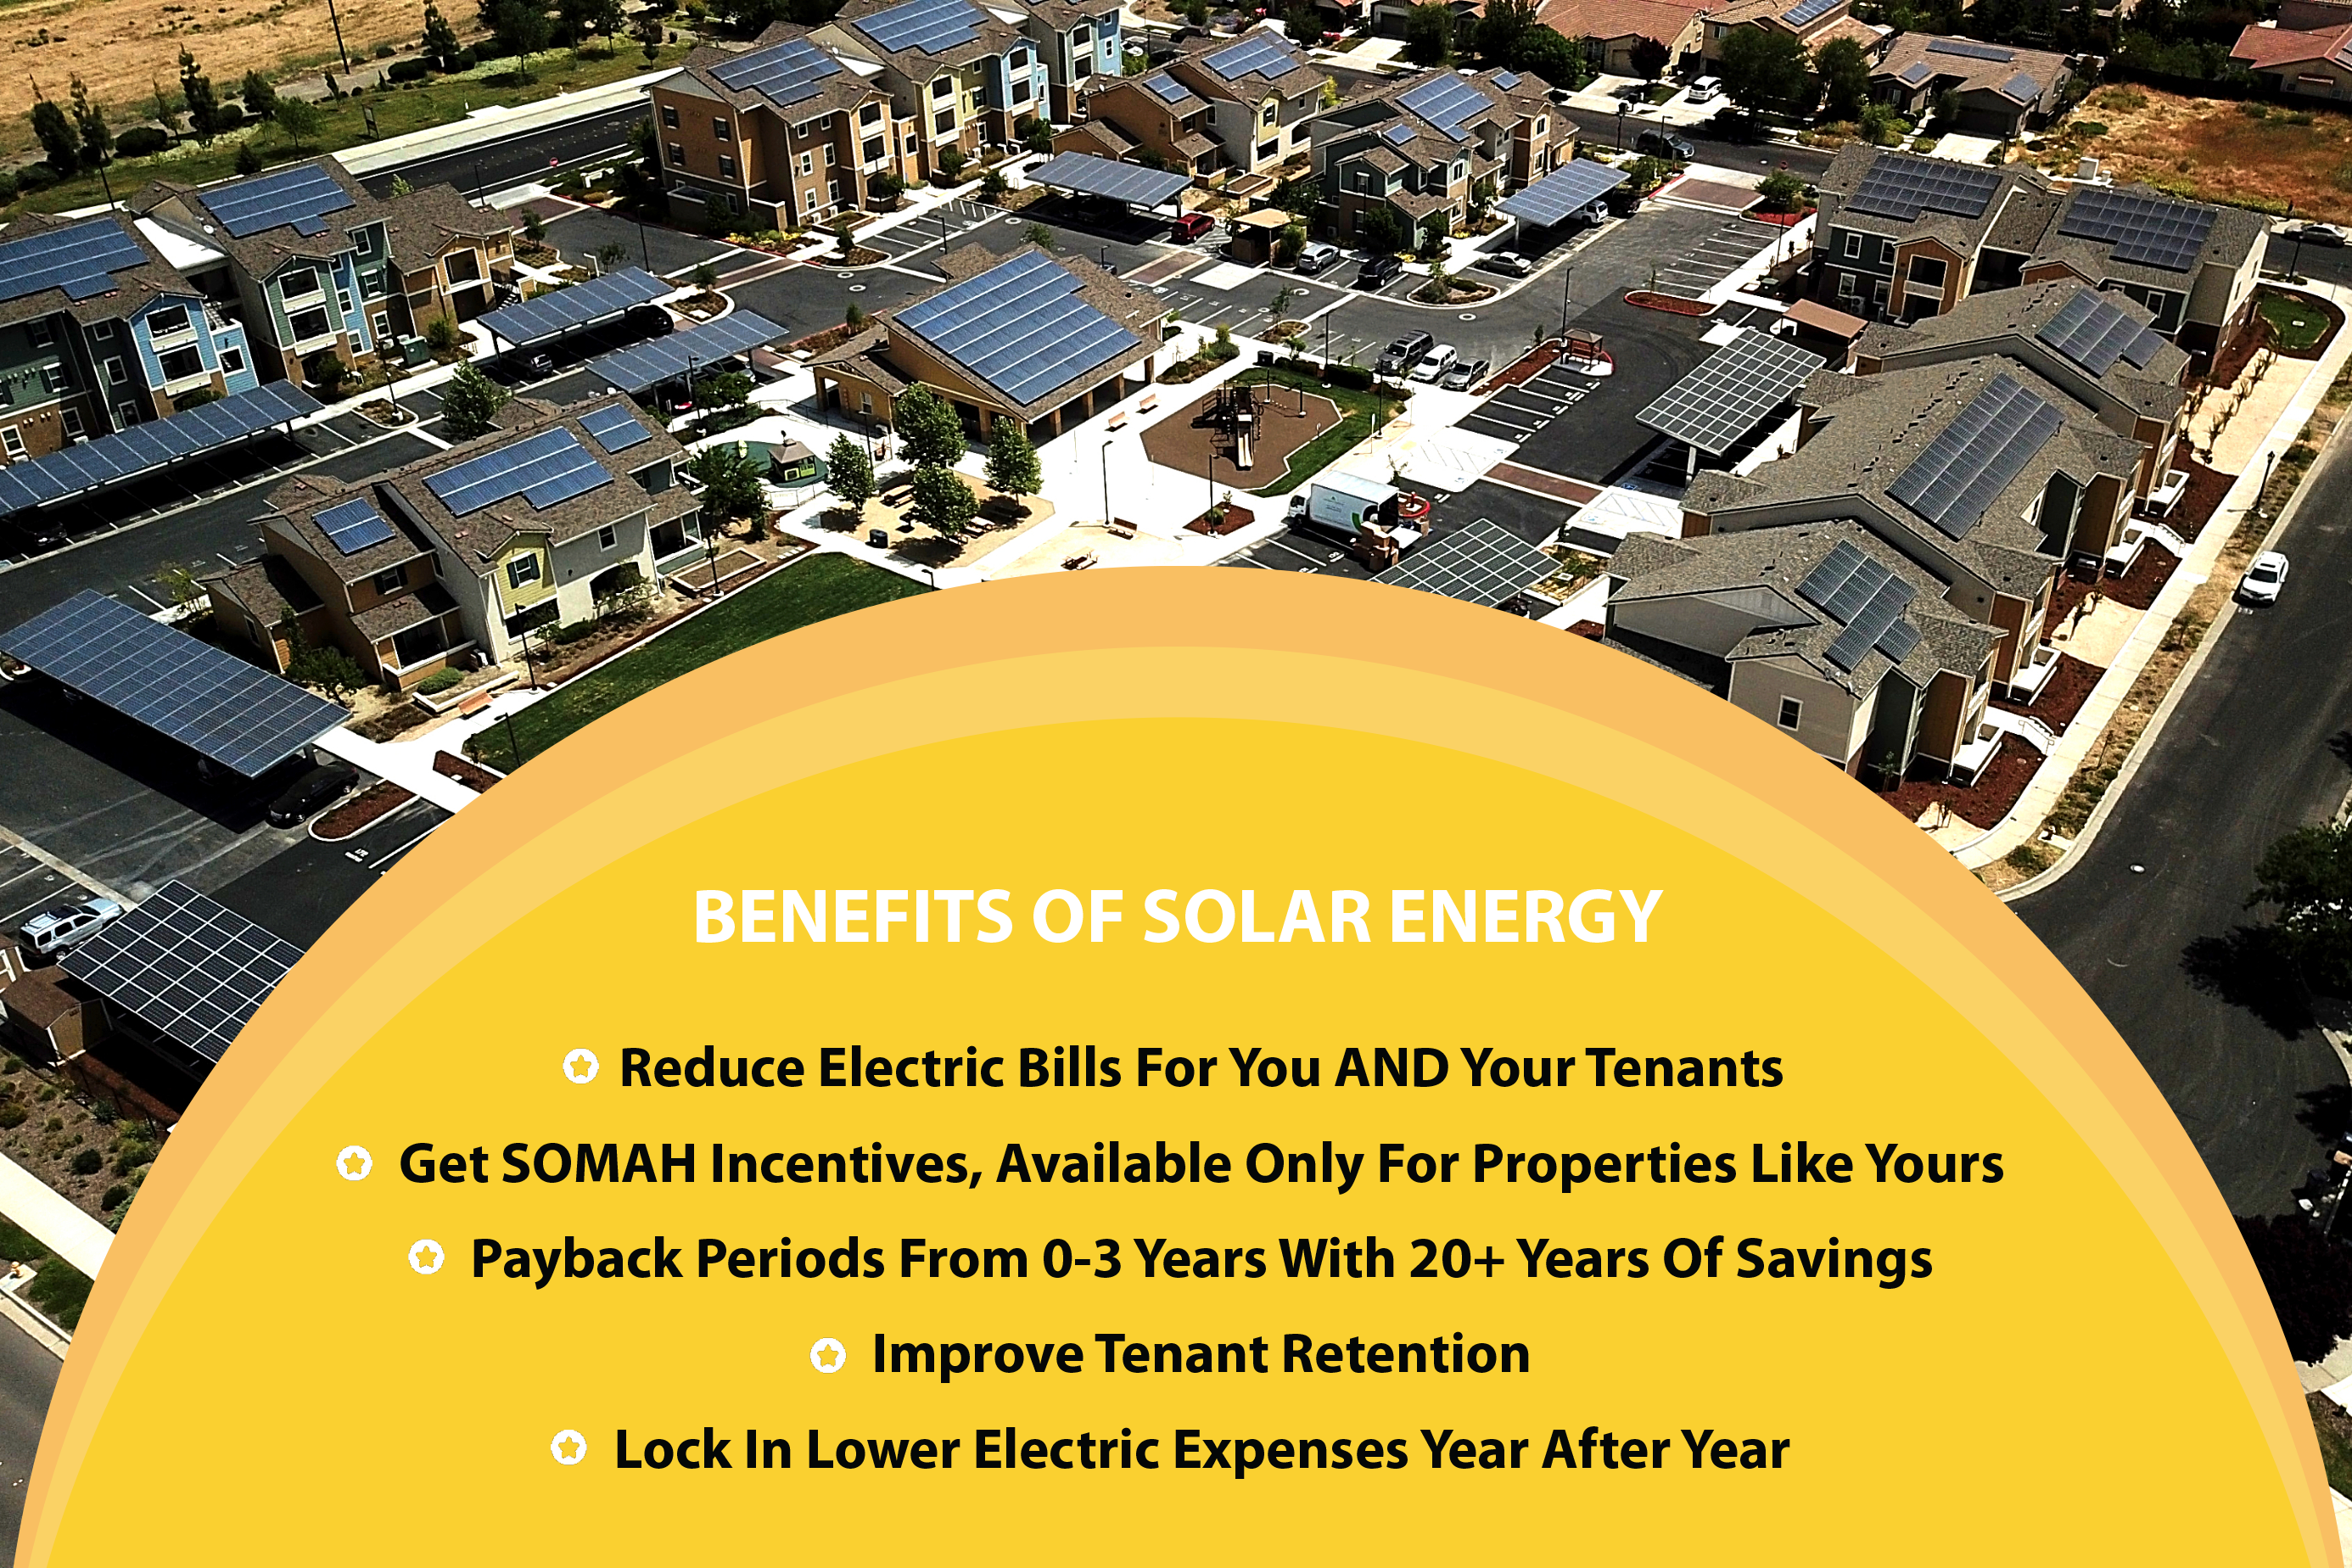 Benefits of solar energy: reduce electric bills for you and your tenants, get SOMAH incentives, payback periods from 0-3 years with 20+ years of savings, improve tenant retention, lock in lower electric expenses year after year